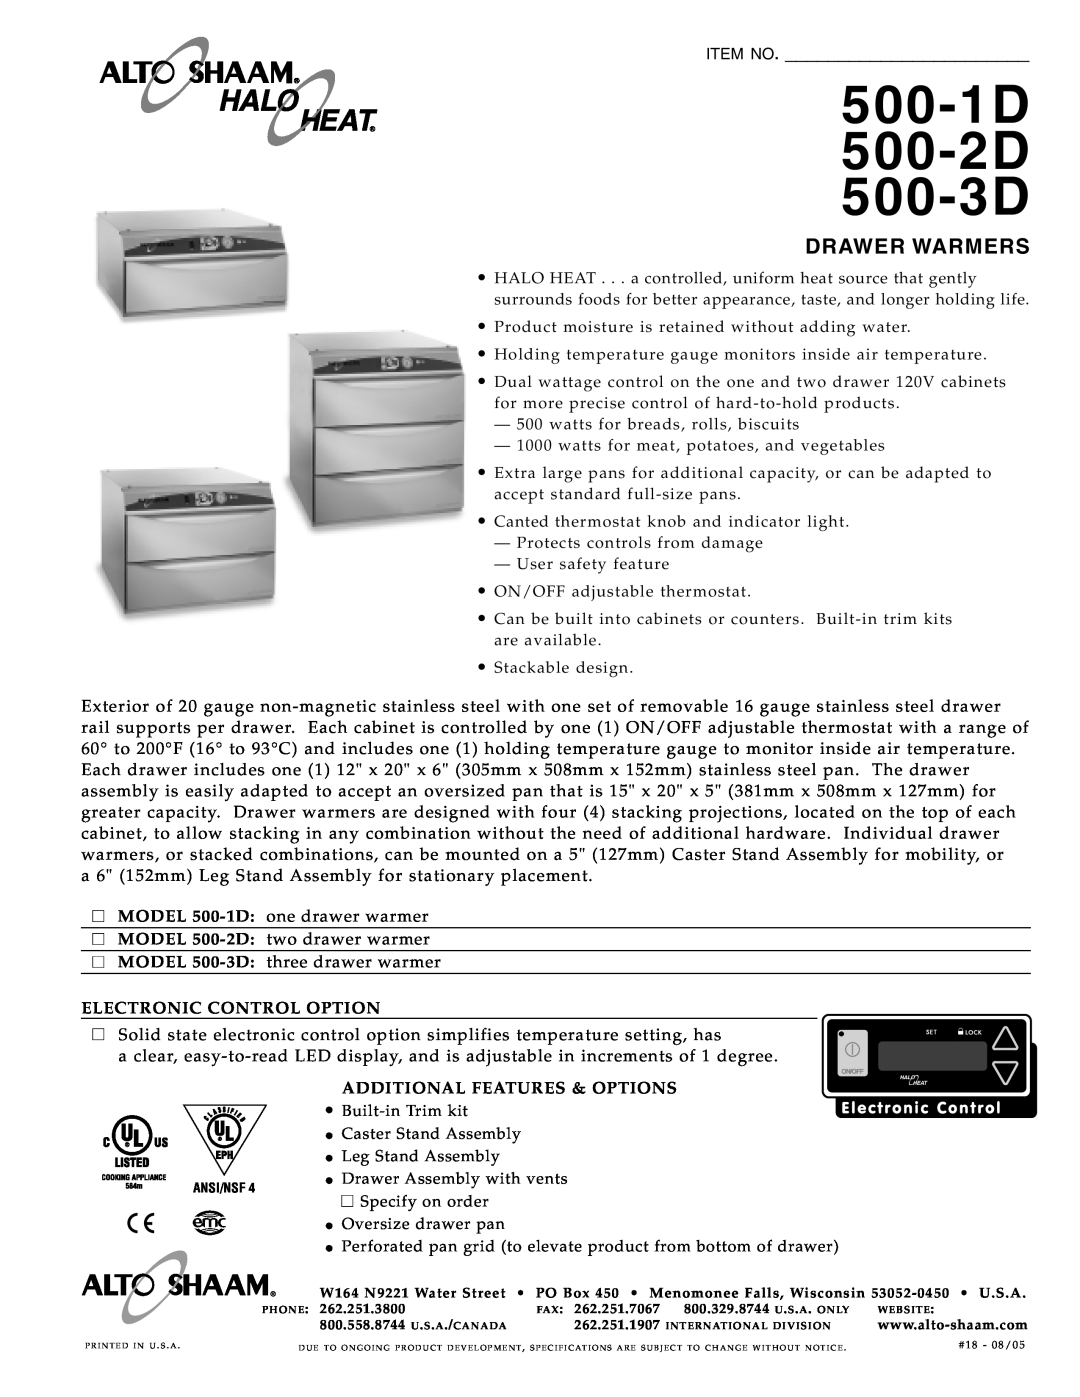 Alto-Shaam specifications 500-1D 500-2D 500-3D, Drawer Warmers, Item No, Electronic Control Option 